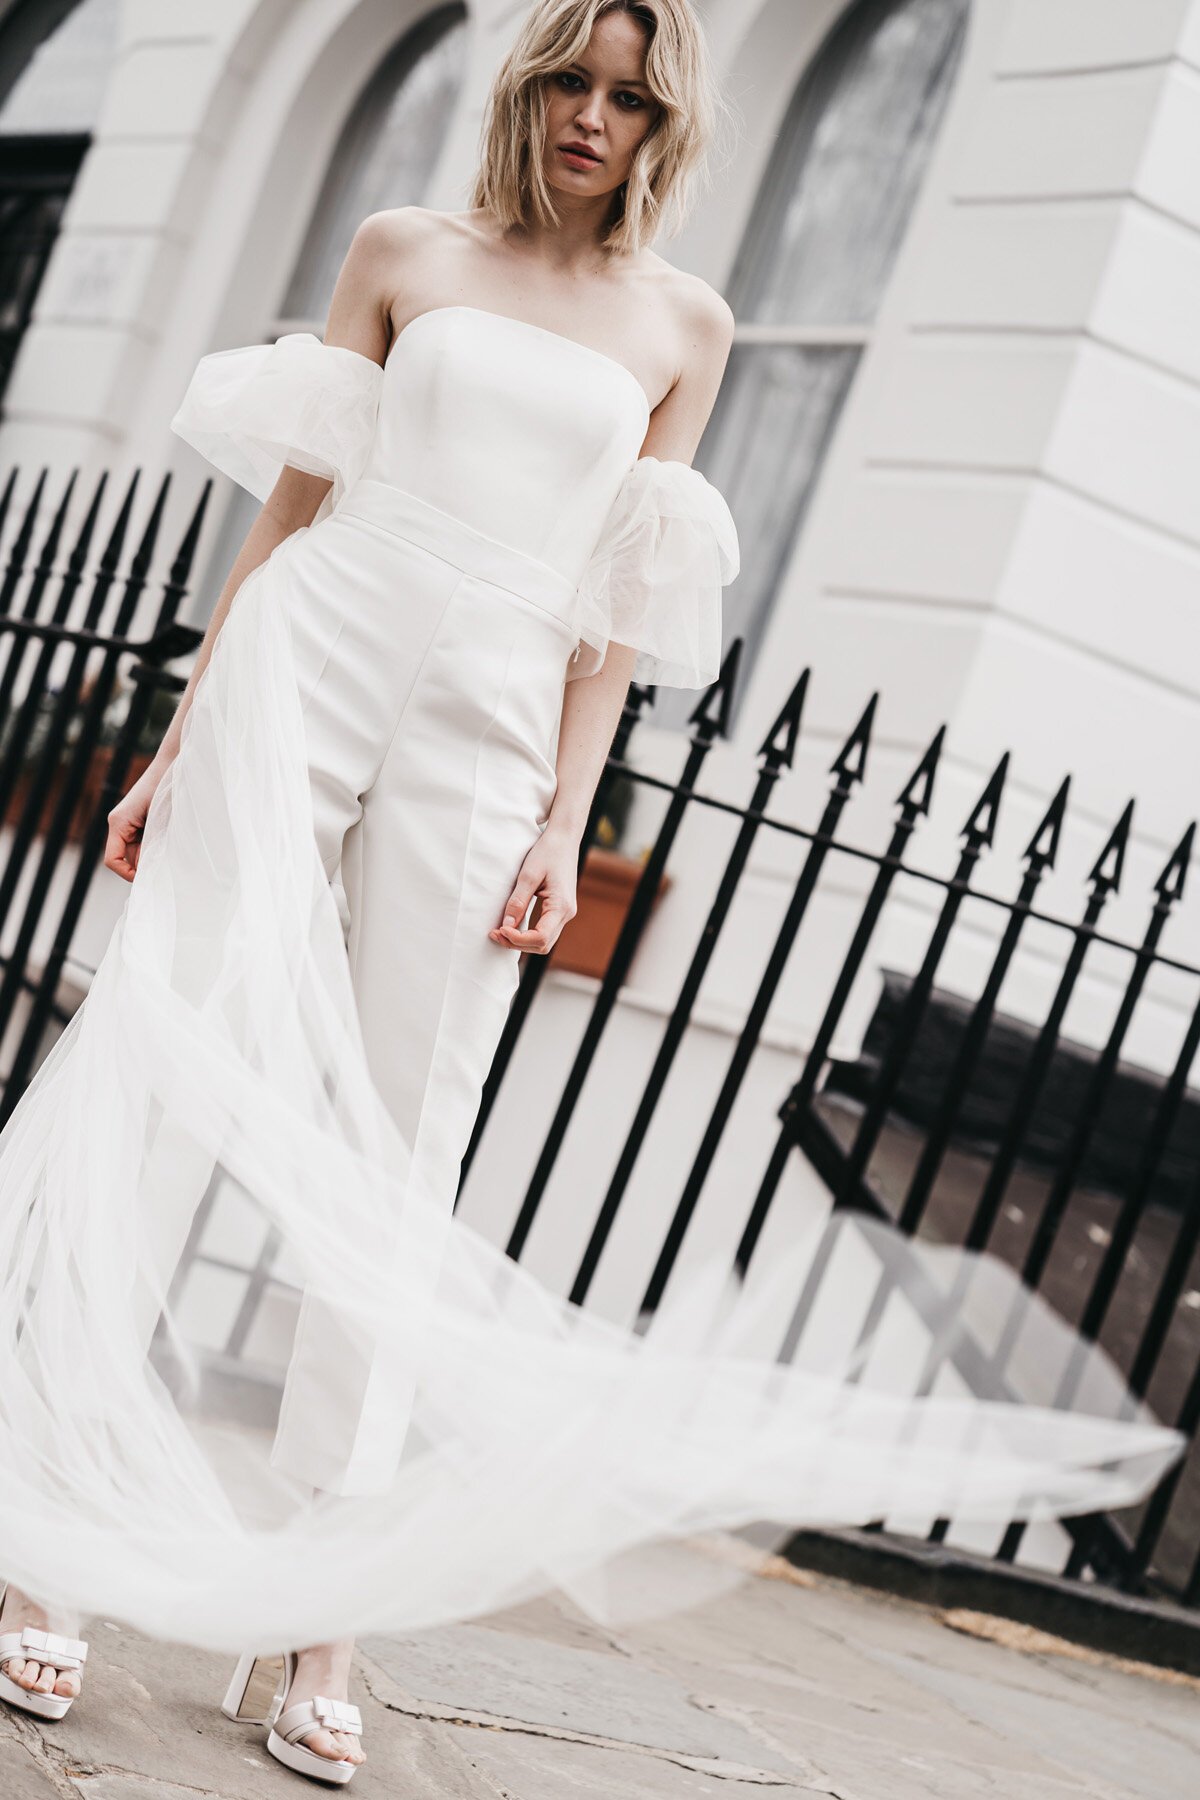 City wedding inspiration by Zach&amp;Grace featuring wedding dresses and separates by Halfpenny London